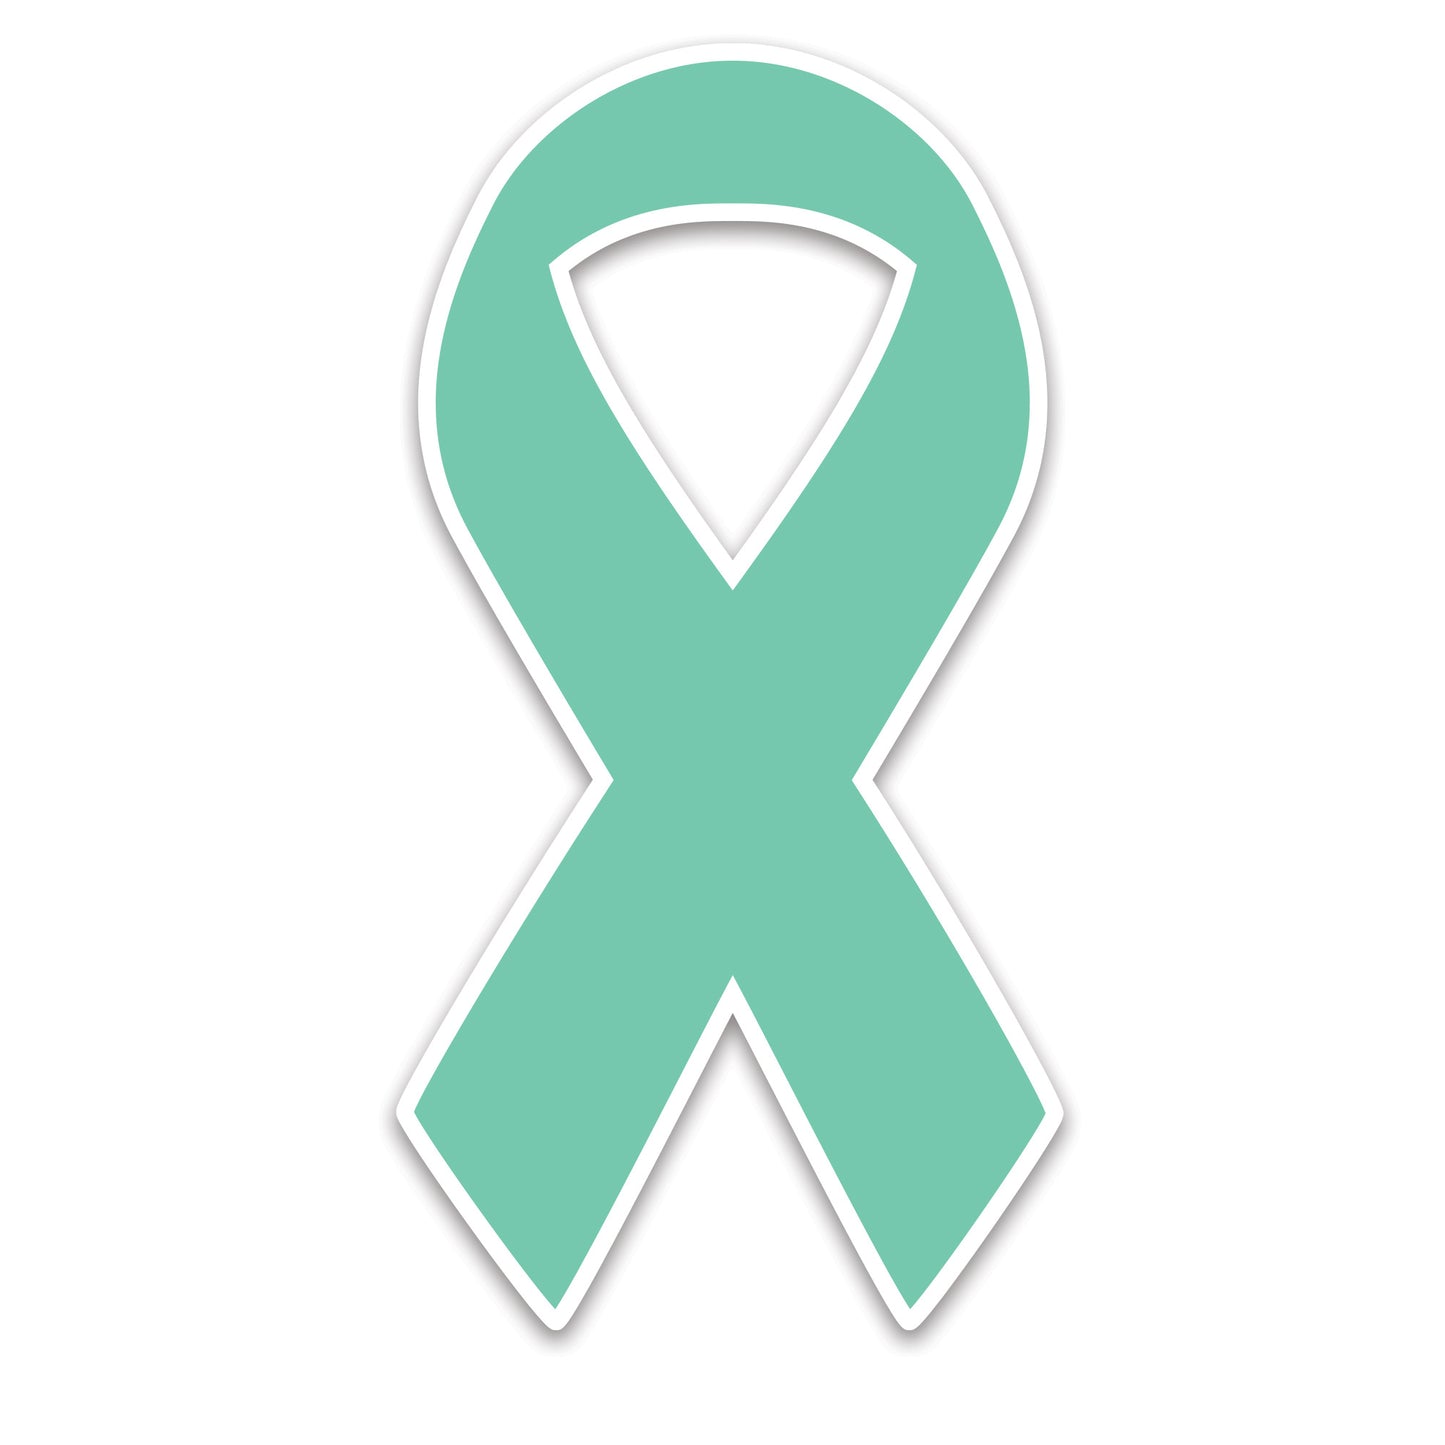 Ovarian Cancer Ribbon stickers